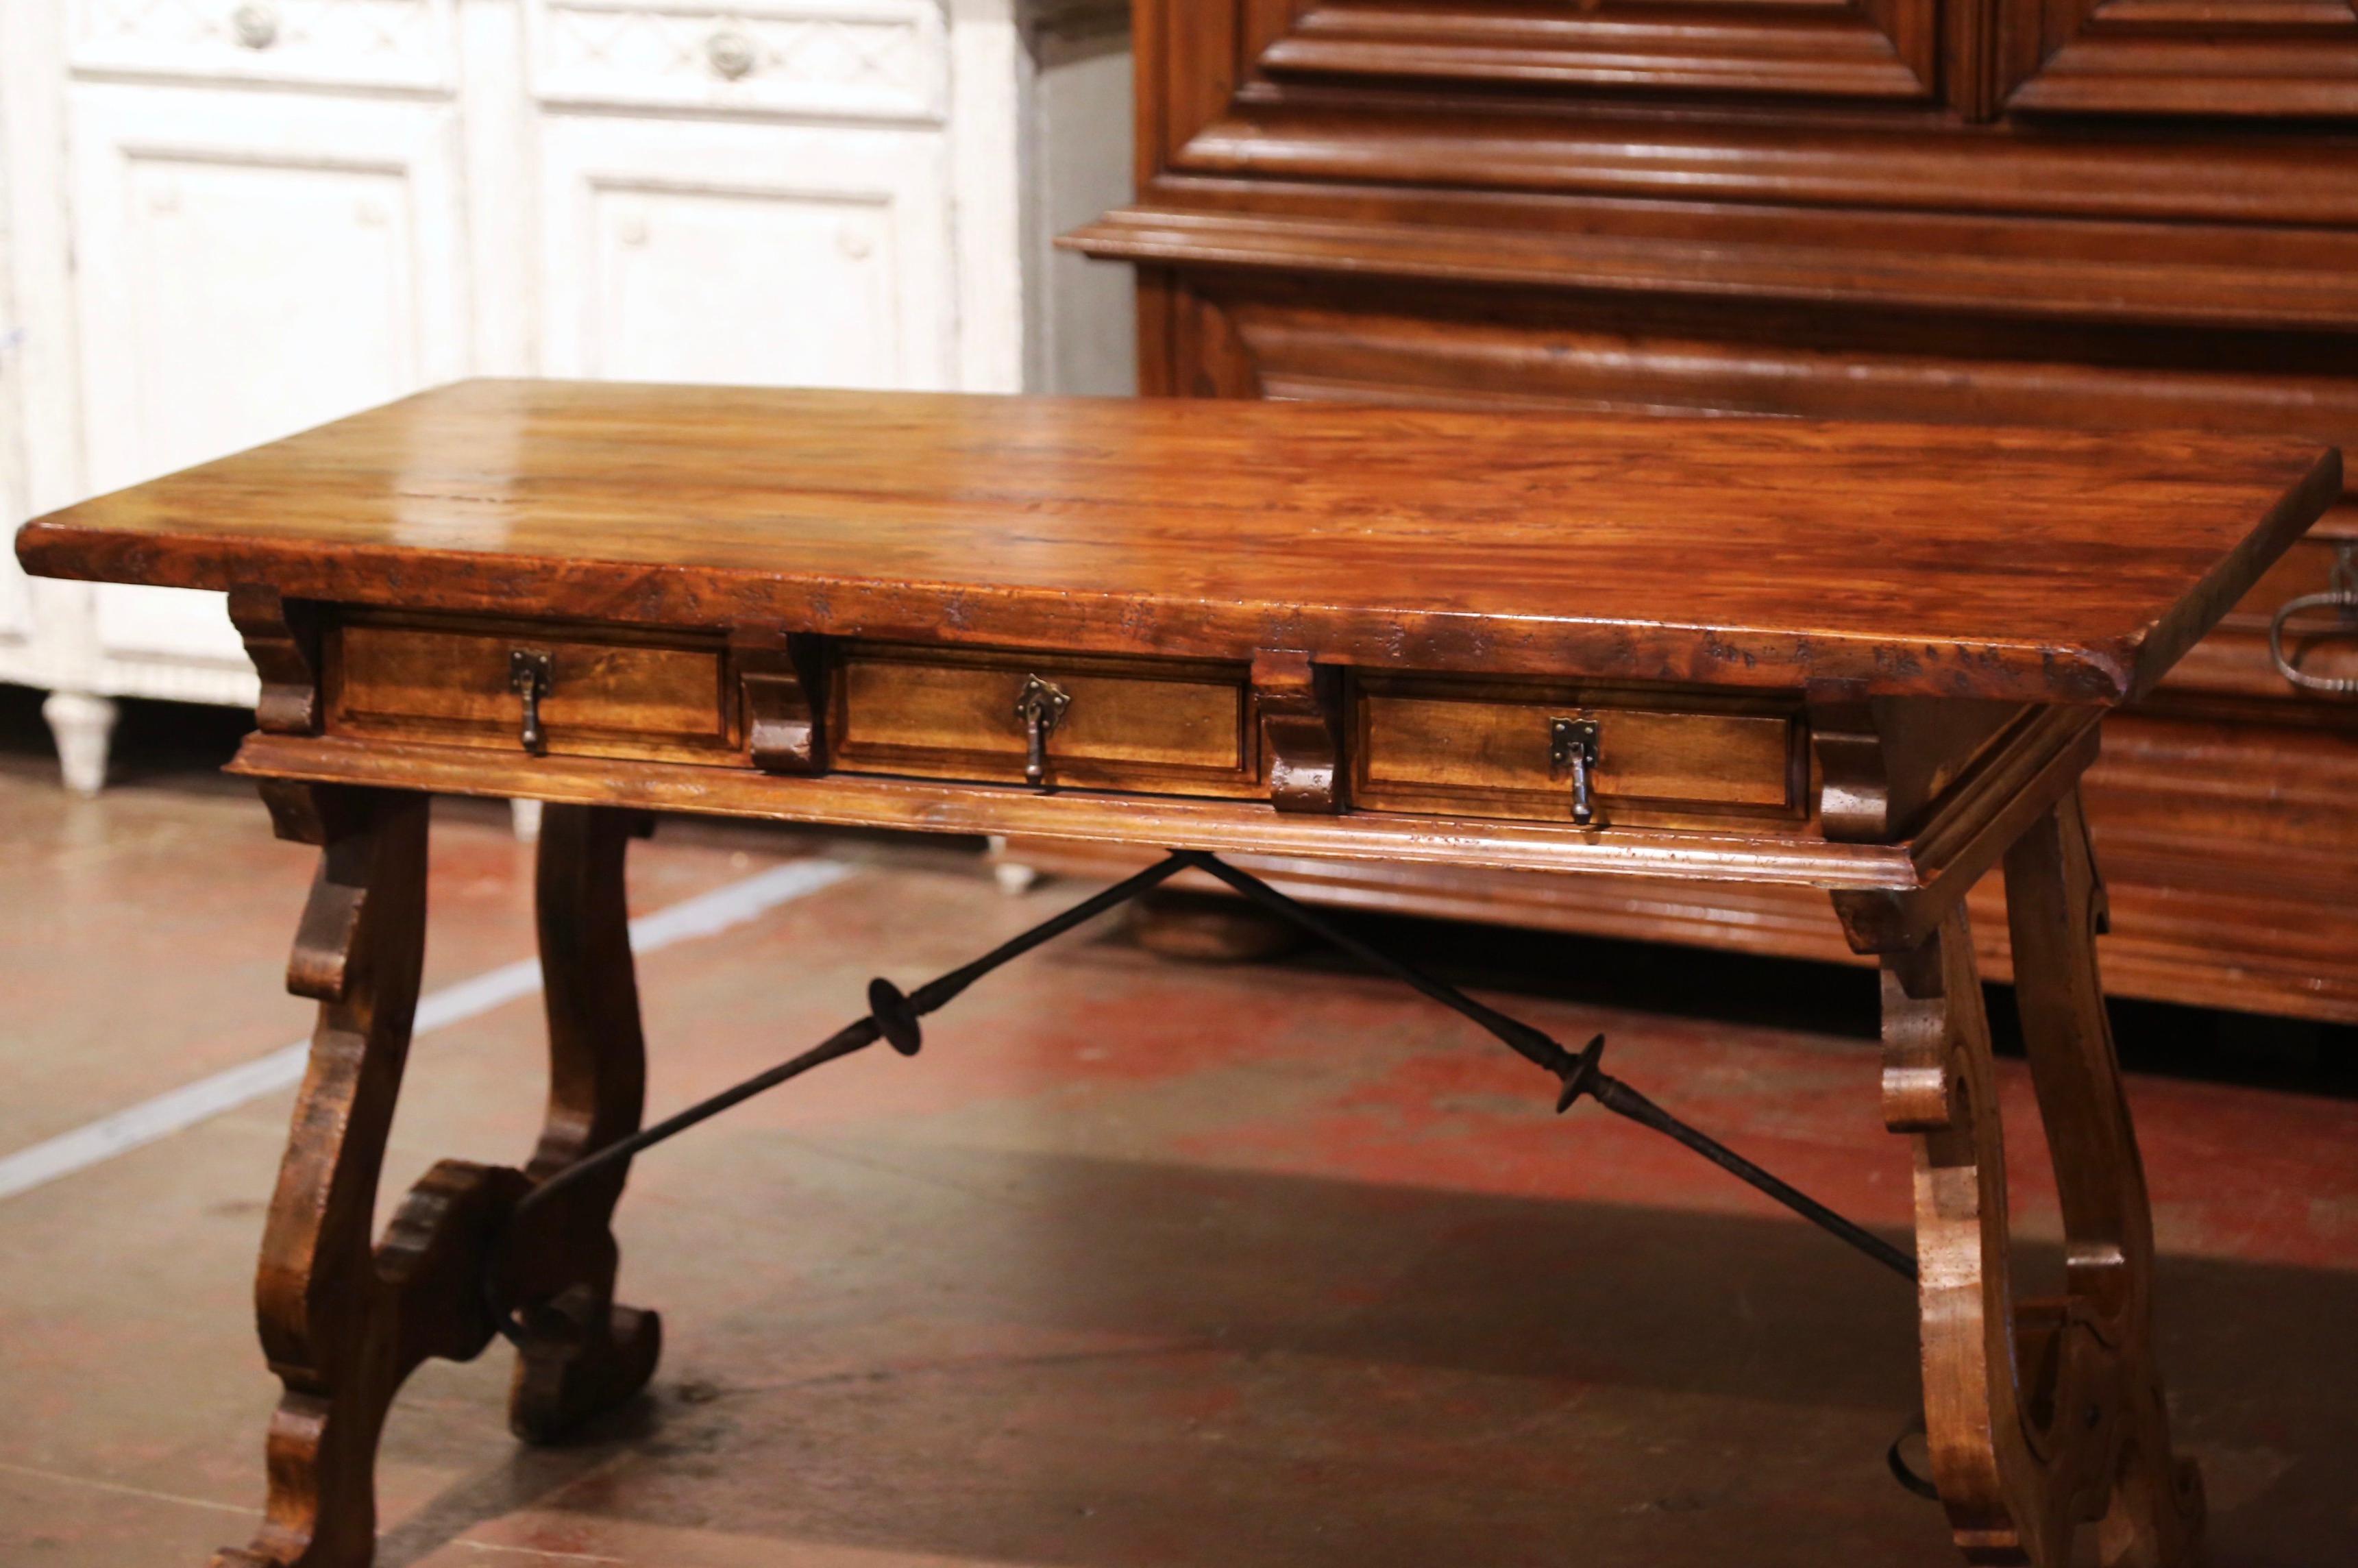 Hand-Carved Early 20th Century Spanish Carved Walnut Writing Table Desk with Iron Stretcher